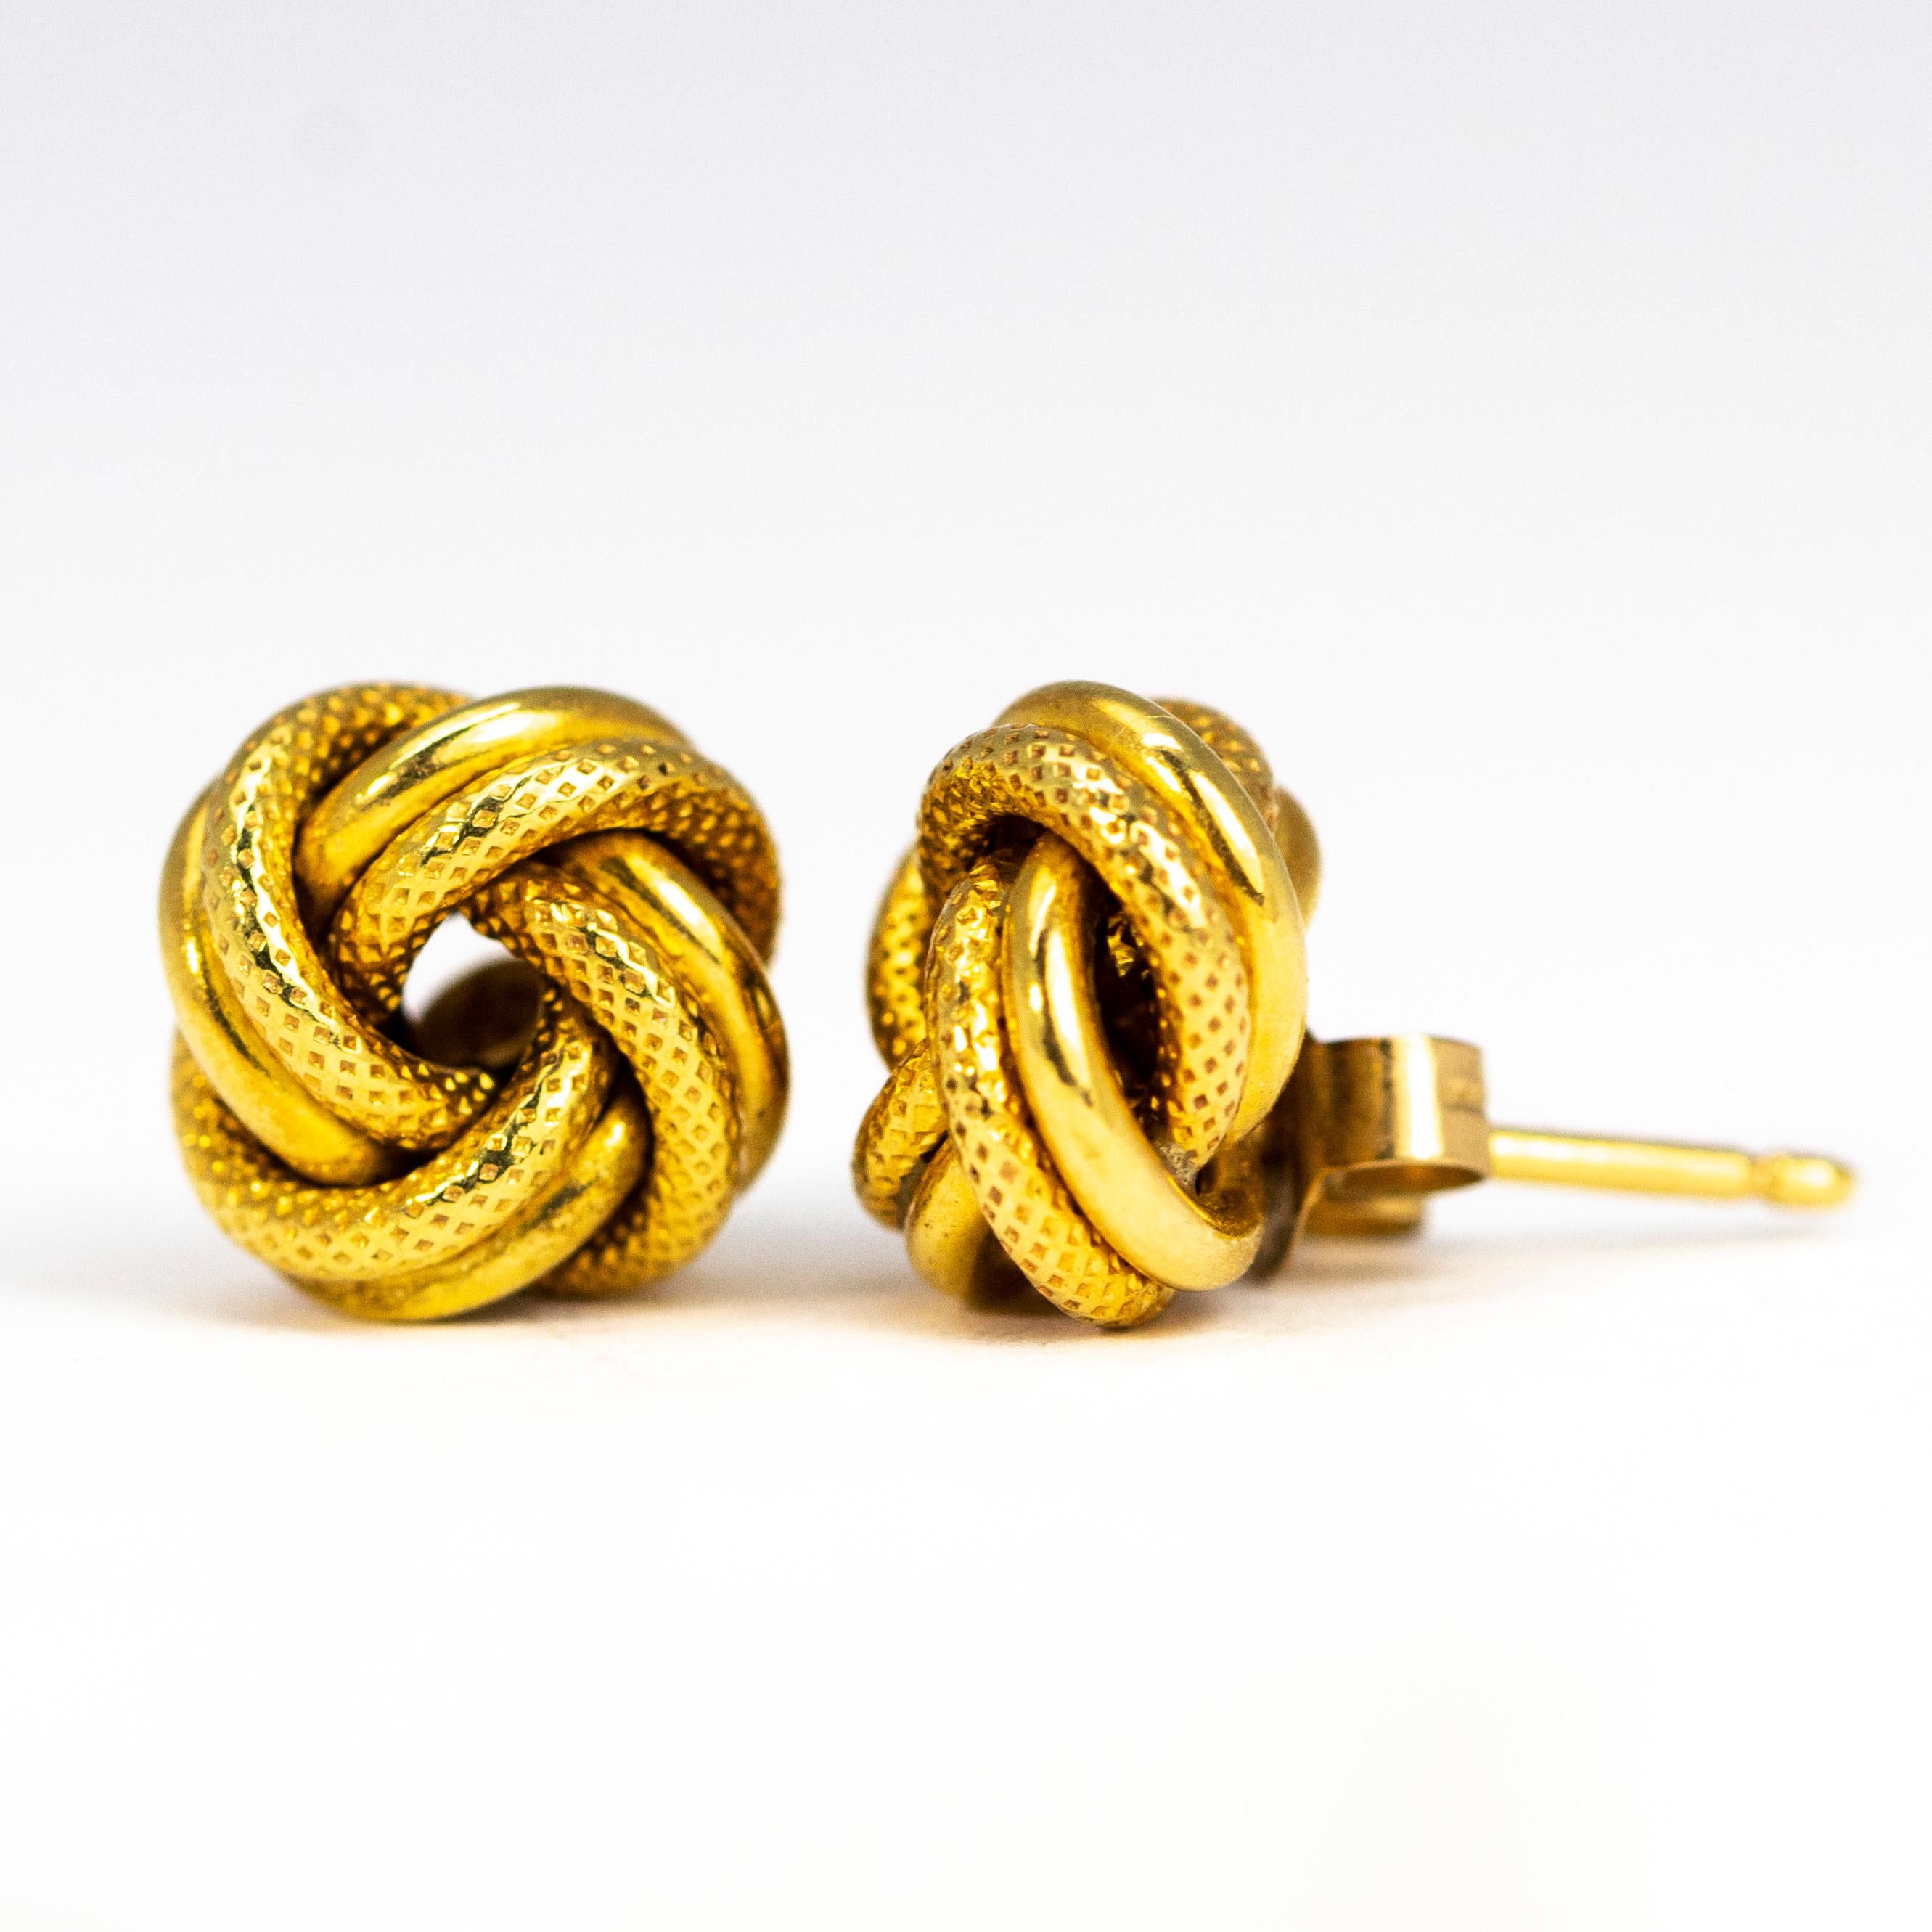 These earrings are super stylish and are modelled in glossy 9ct gold. The knots have a couple of strands which are smooth and a couple of strands that are finely engraved with gorgeous texture.  

Diameter: 10mm   

Weight: 1.4g